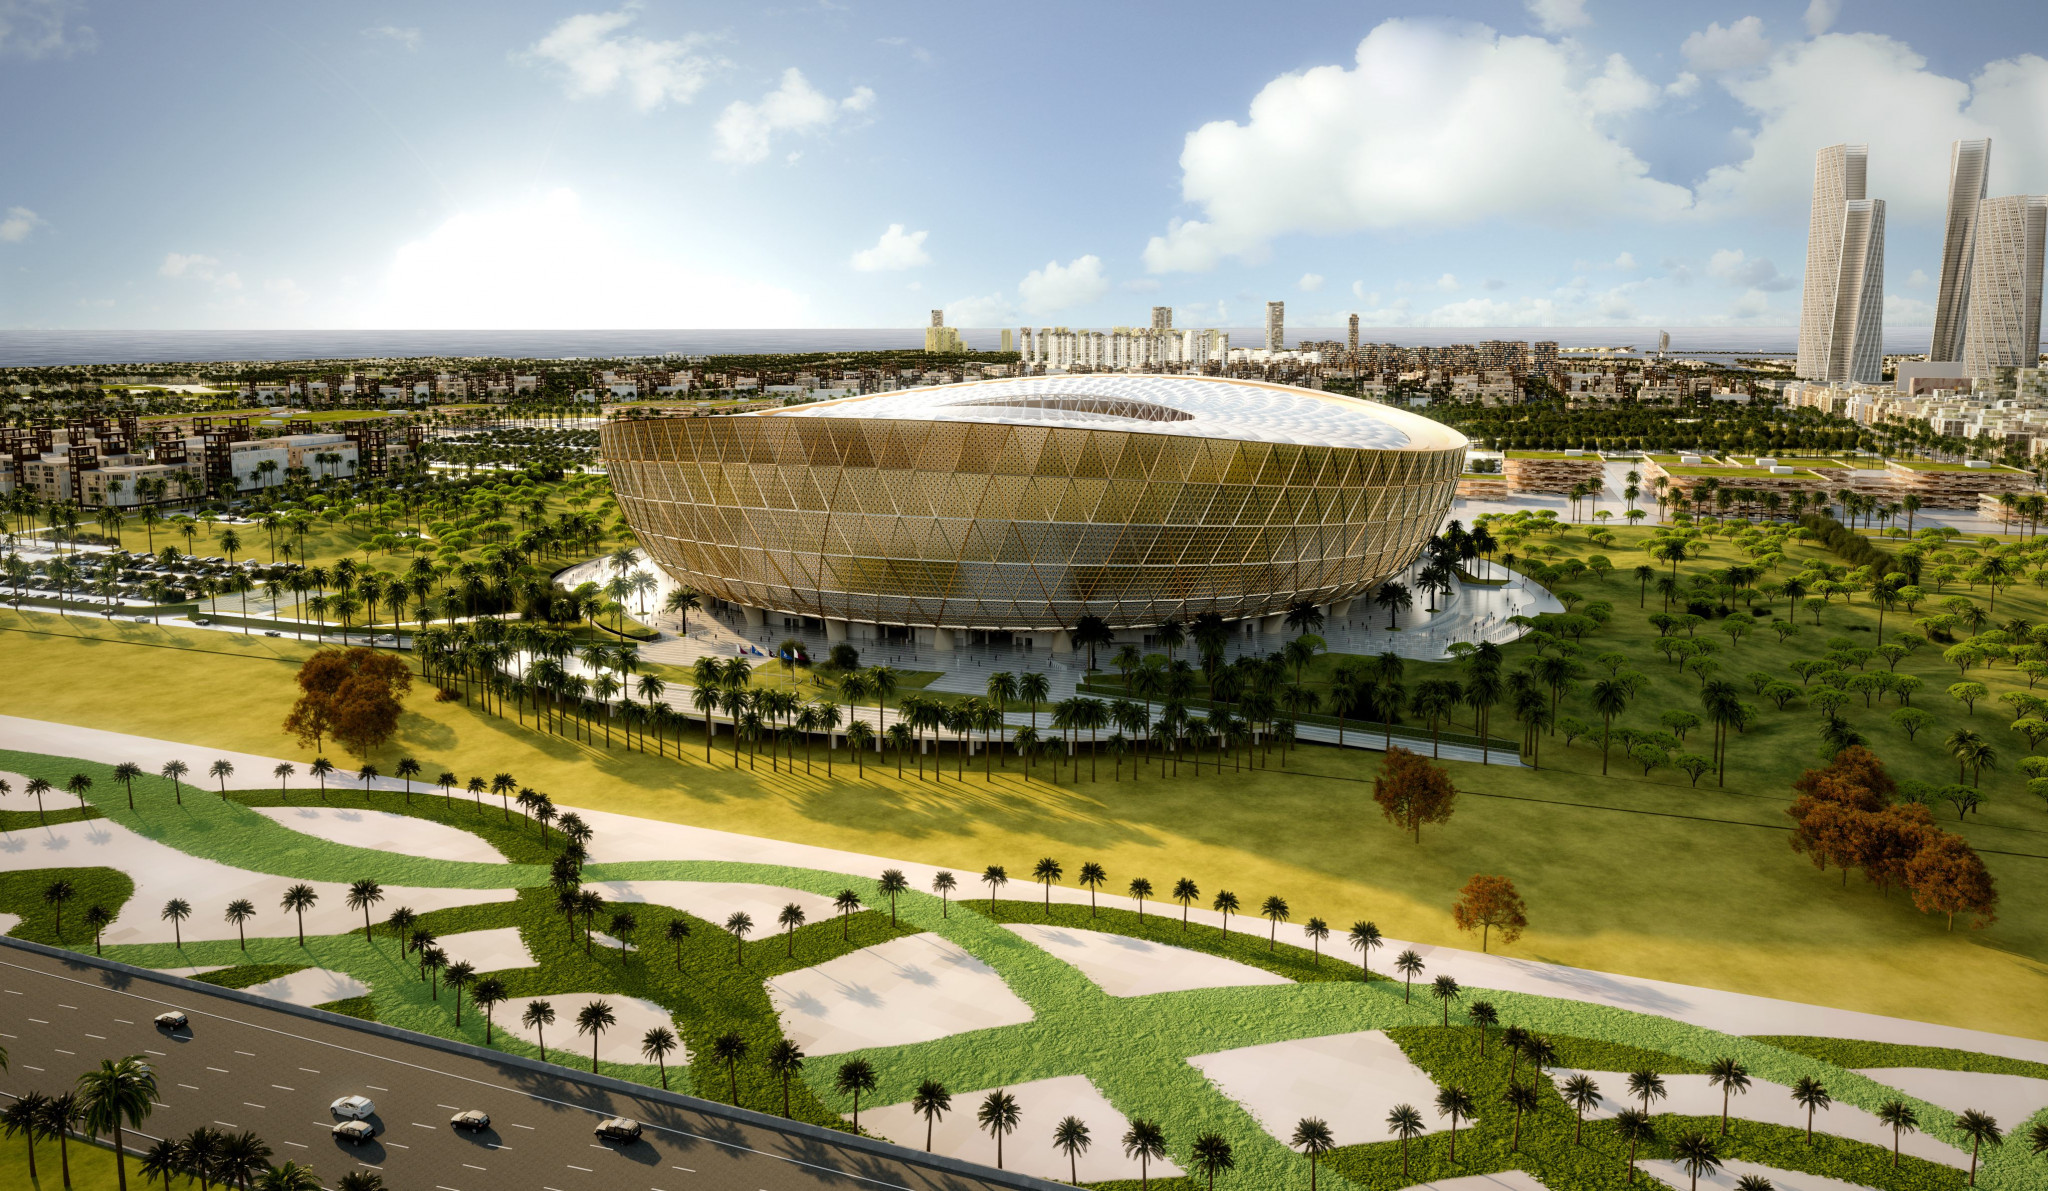 Qatar 2022 have revealed the design for the Lusail Stadium, due to host the opening match and final of the next FIFA World Cup ©Getty Images